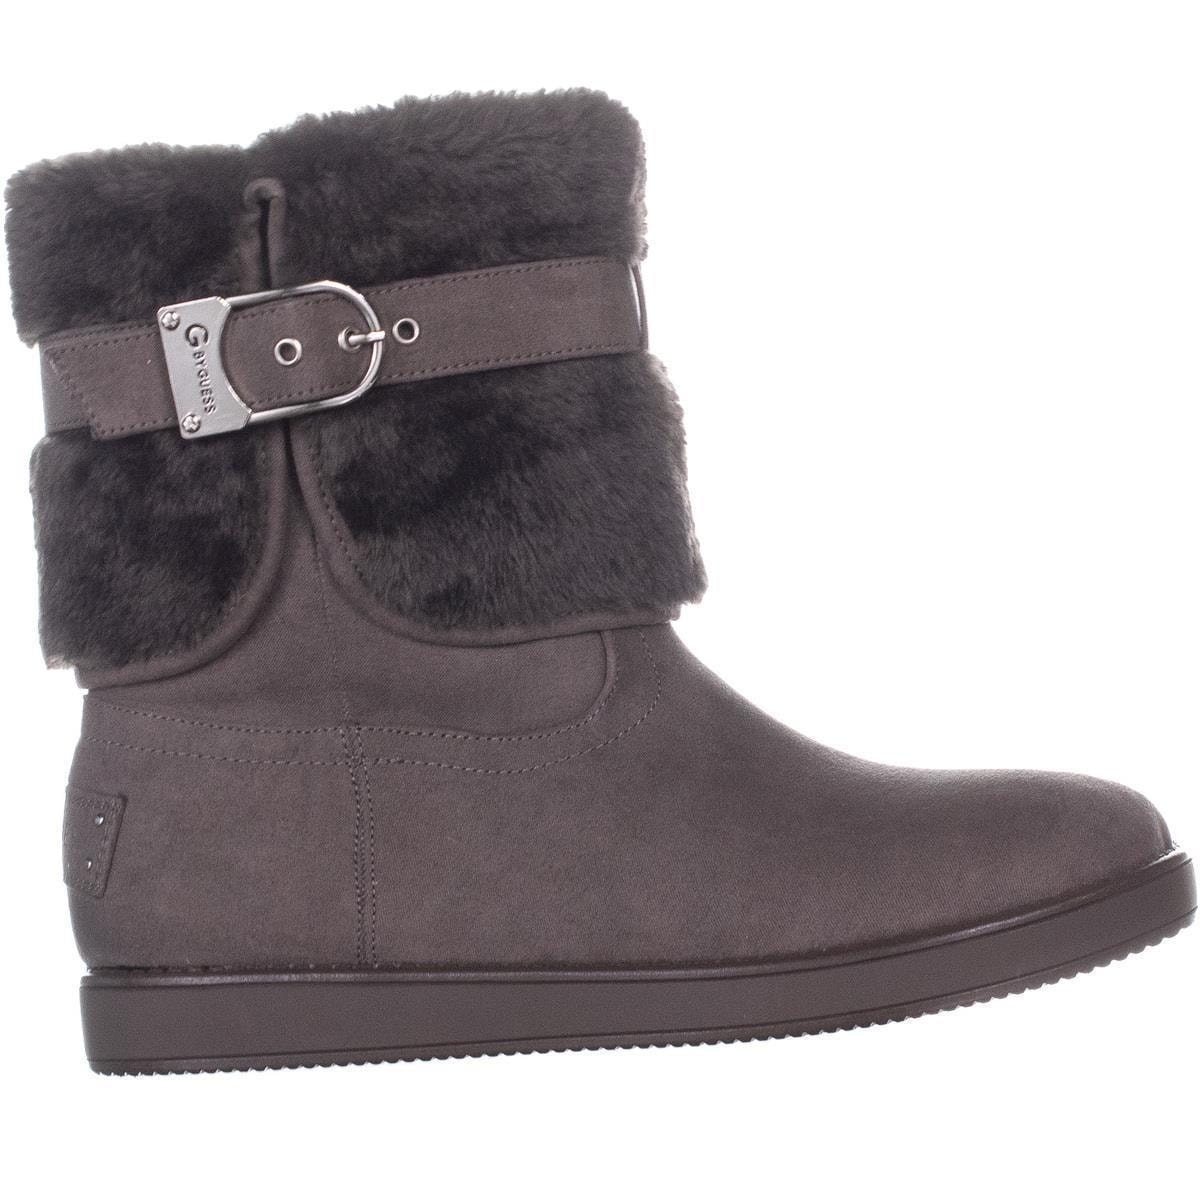 g by guess winter boots